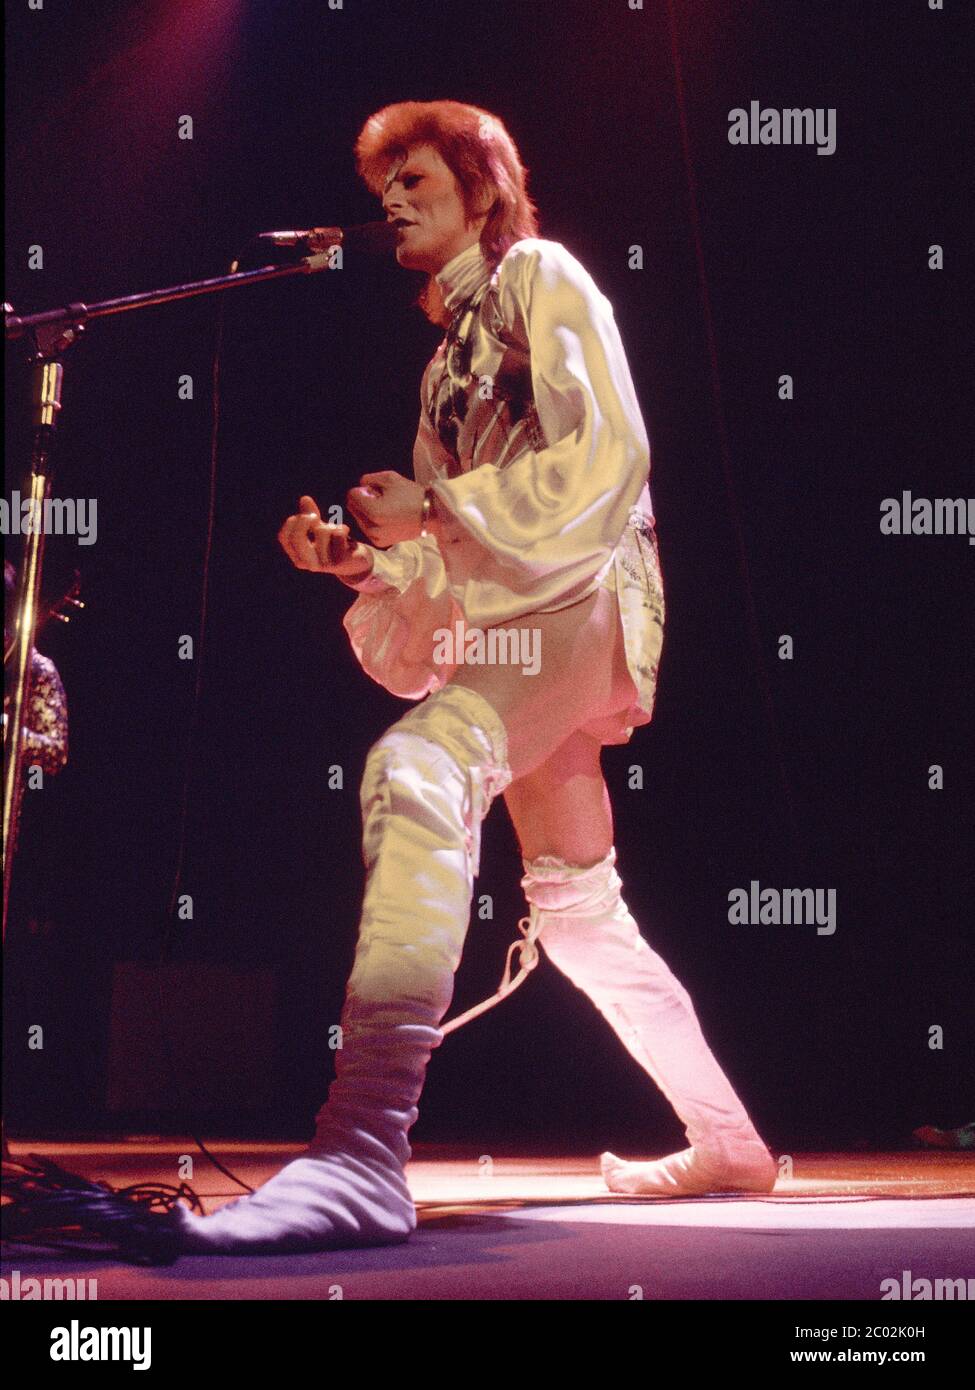 David Bowie as Ziggy Stardust in concert at Earl's Court Exhibition  Hall,London 12th May 1973 Stock Photo - Alamy